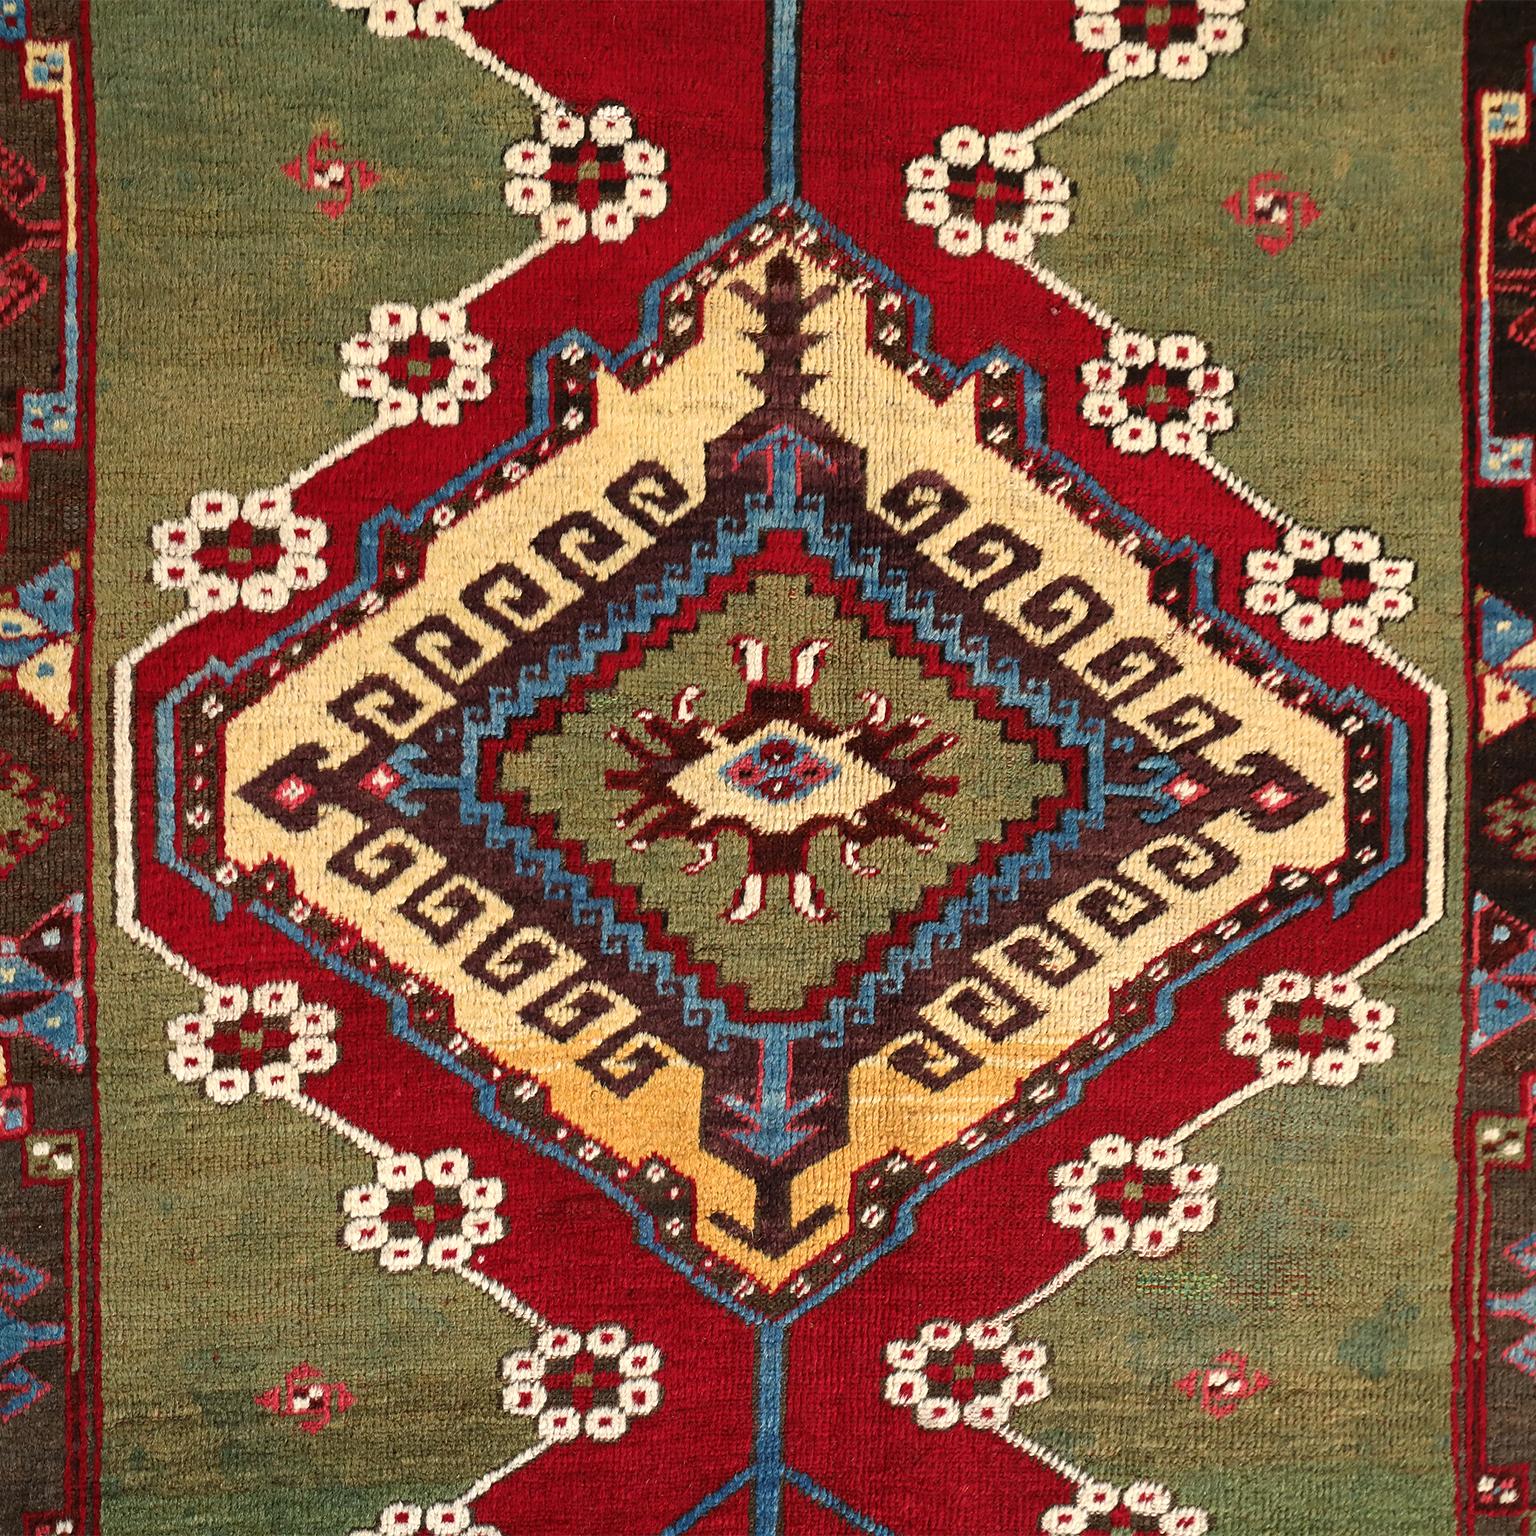 This Turkish Kirsehir carpet circa 1920 in pure handspun wool and vegetable dyes features a hand knotted pile and contrasting coloration, showcasing a geometric central medallion amid fields of red and green. Outlines of light cream, yellow, and